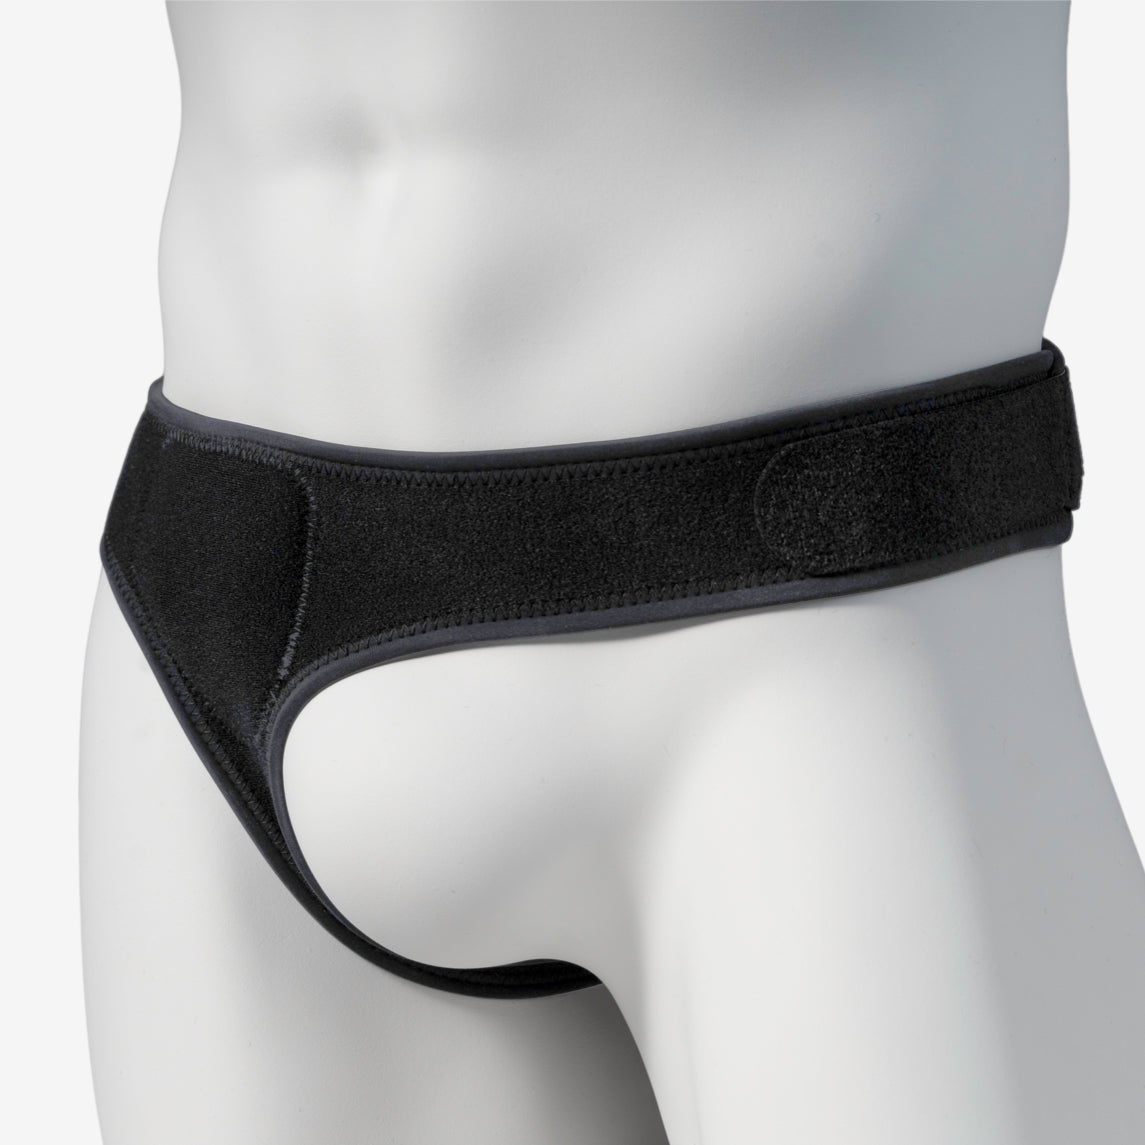 Hernia Belt for Men Inguinal, Hernia Support Truss for Left or Right Side,  with Hot/Cold Pack for Hernia Repair (Small/Medium)